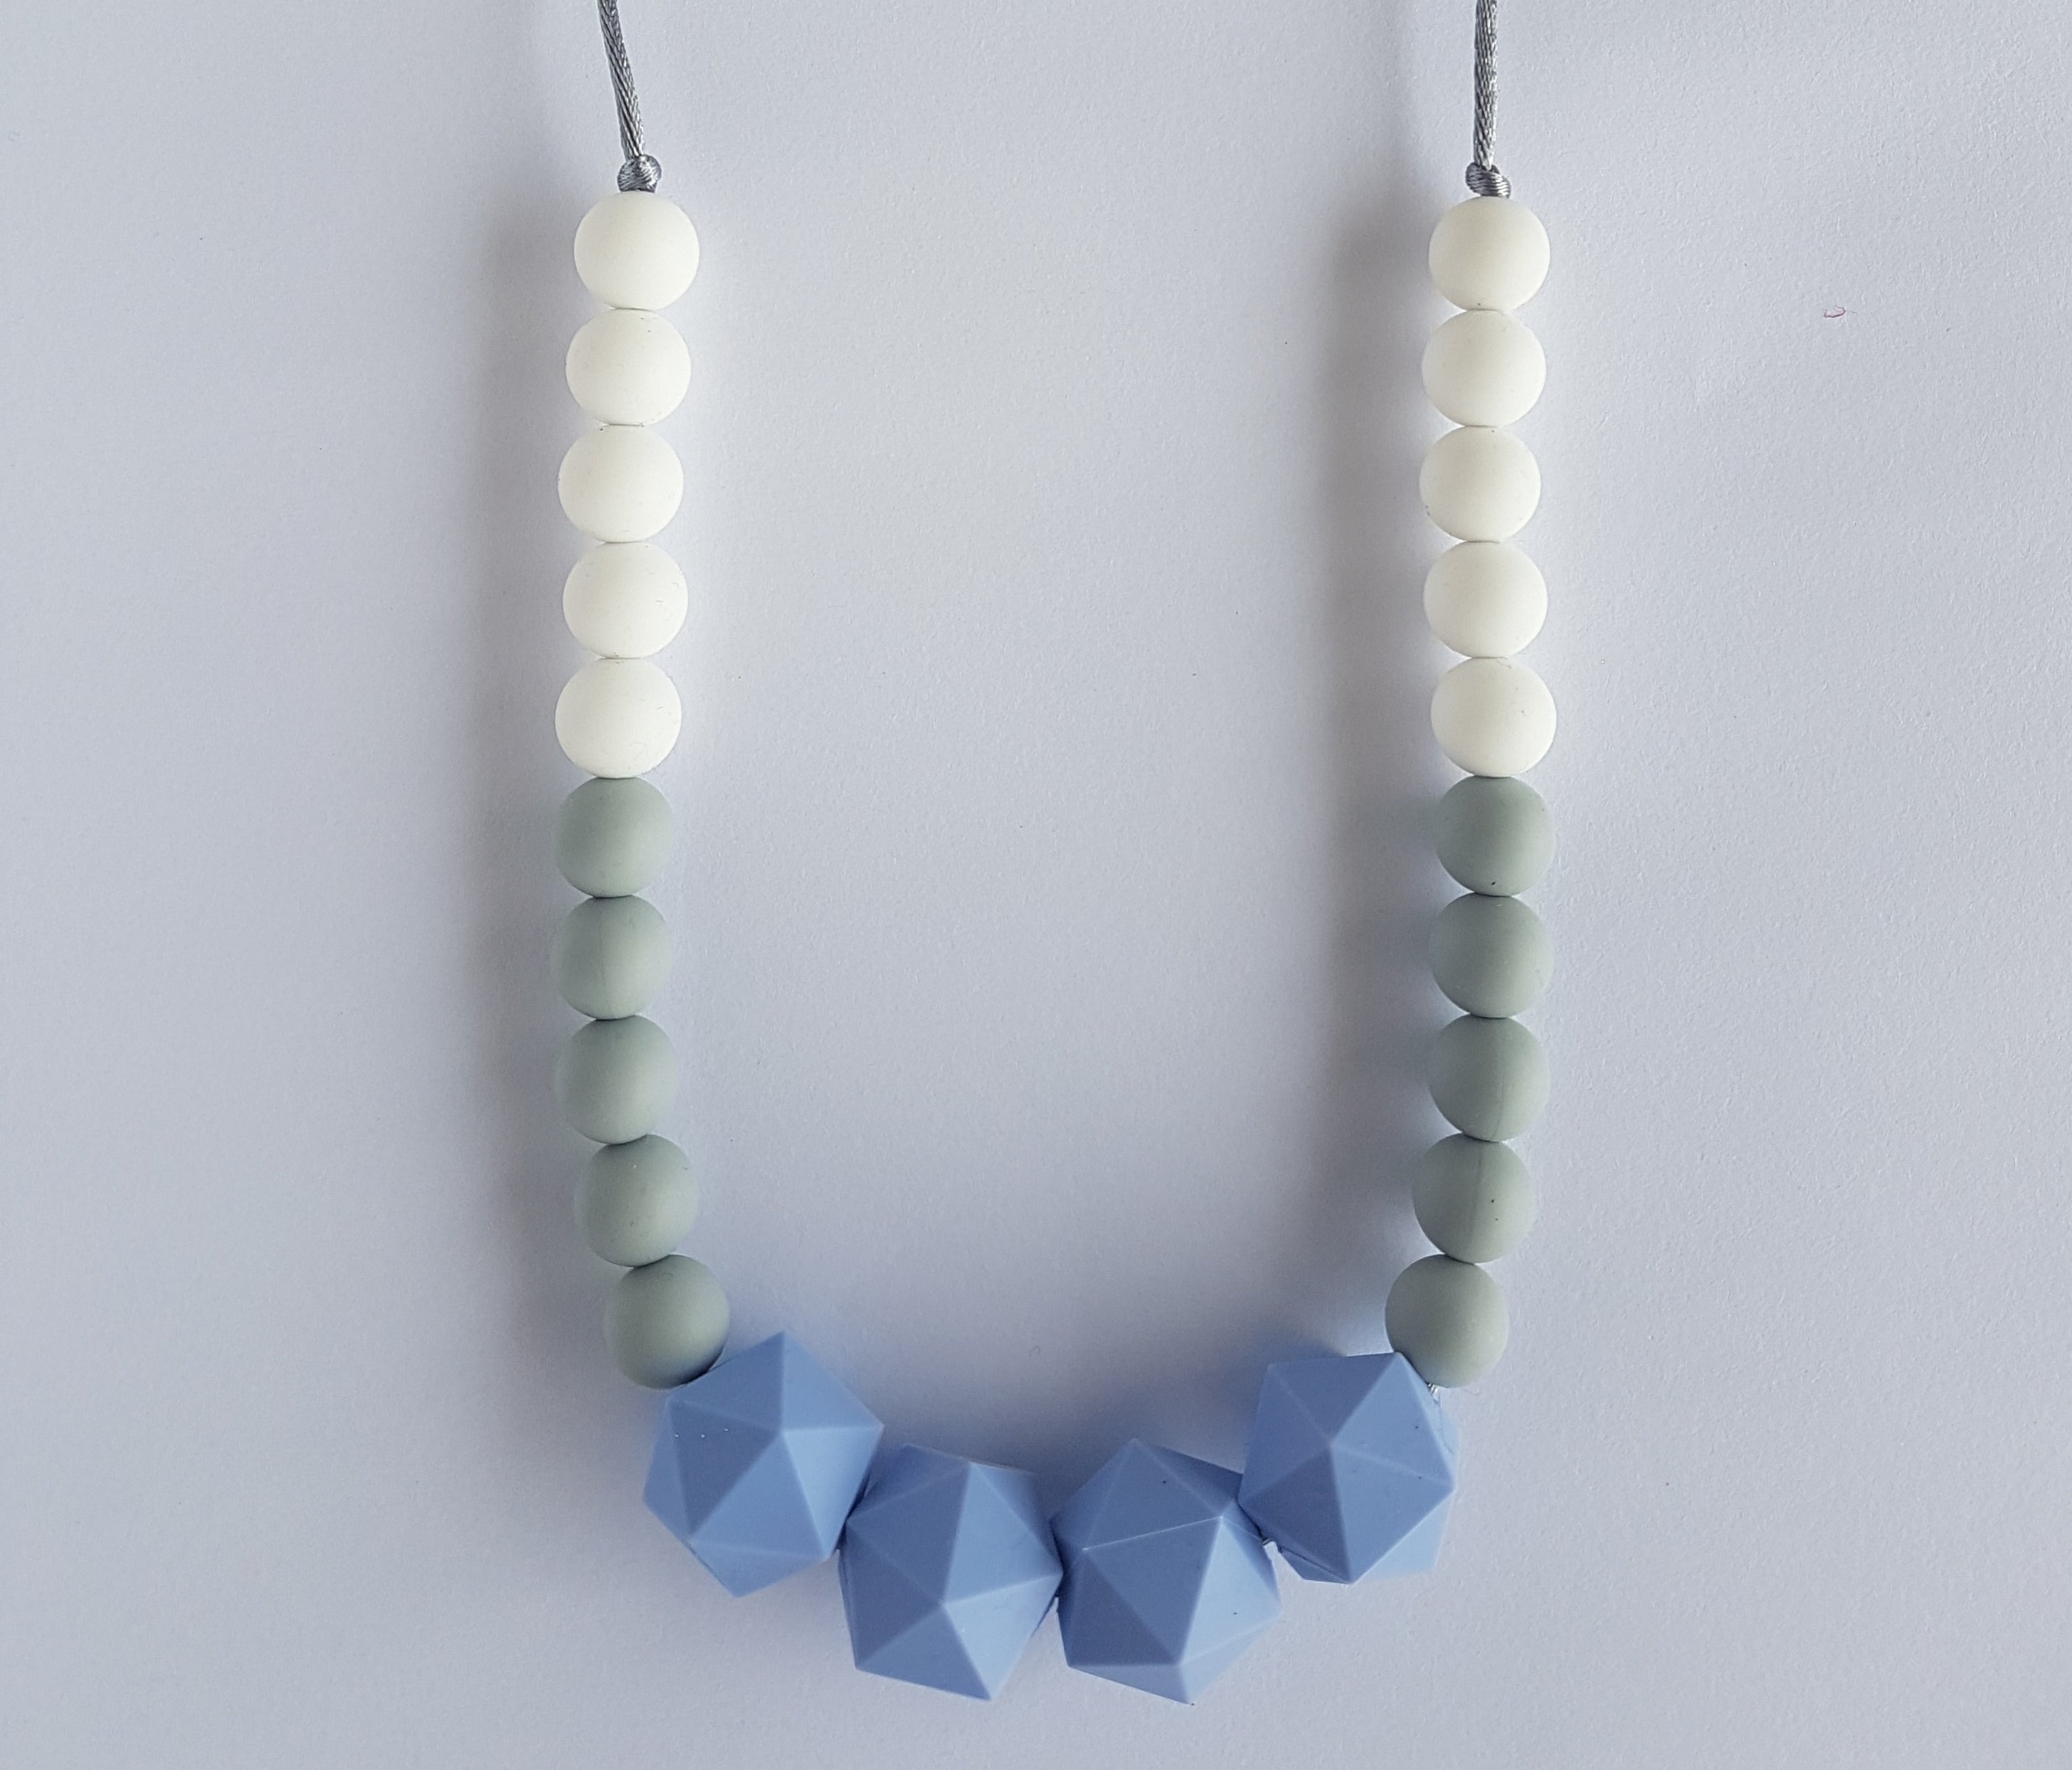 Amsterdam Silicone Teething Necklace - White, Cool Grey and Serenity Blue